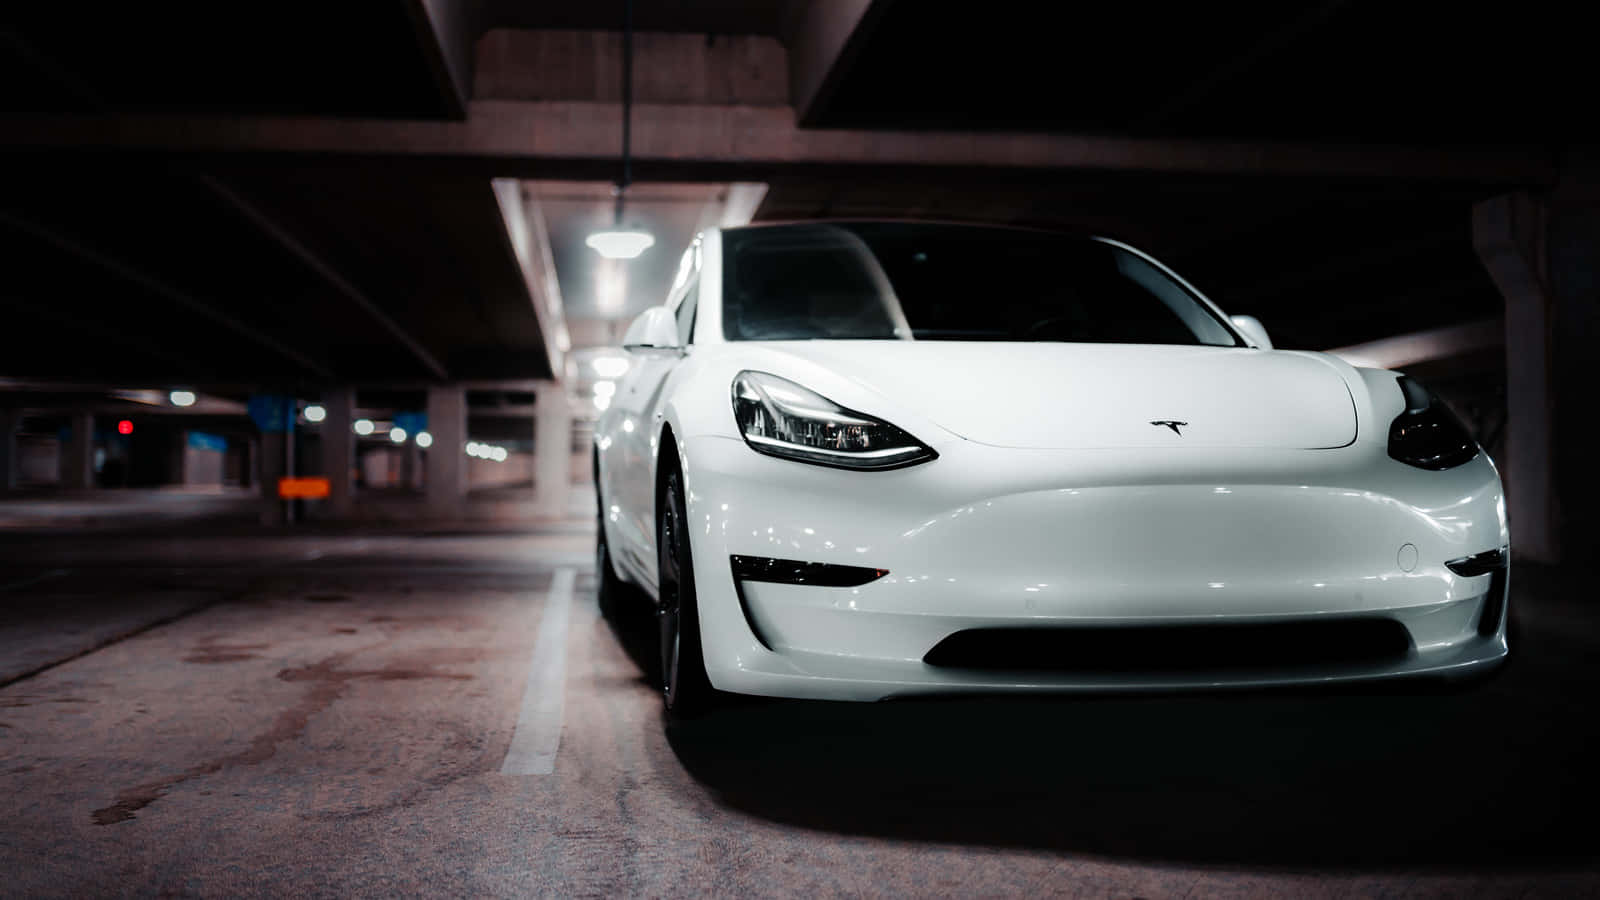 Stunning Tesla Model 3 - A Fusion Of Technology And Elegance. Wallpaper